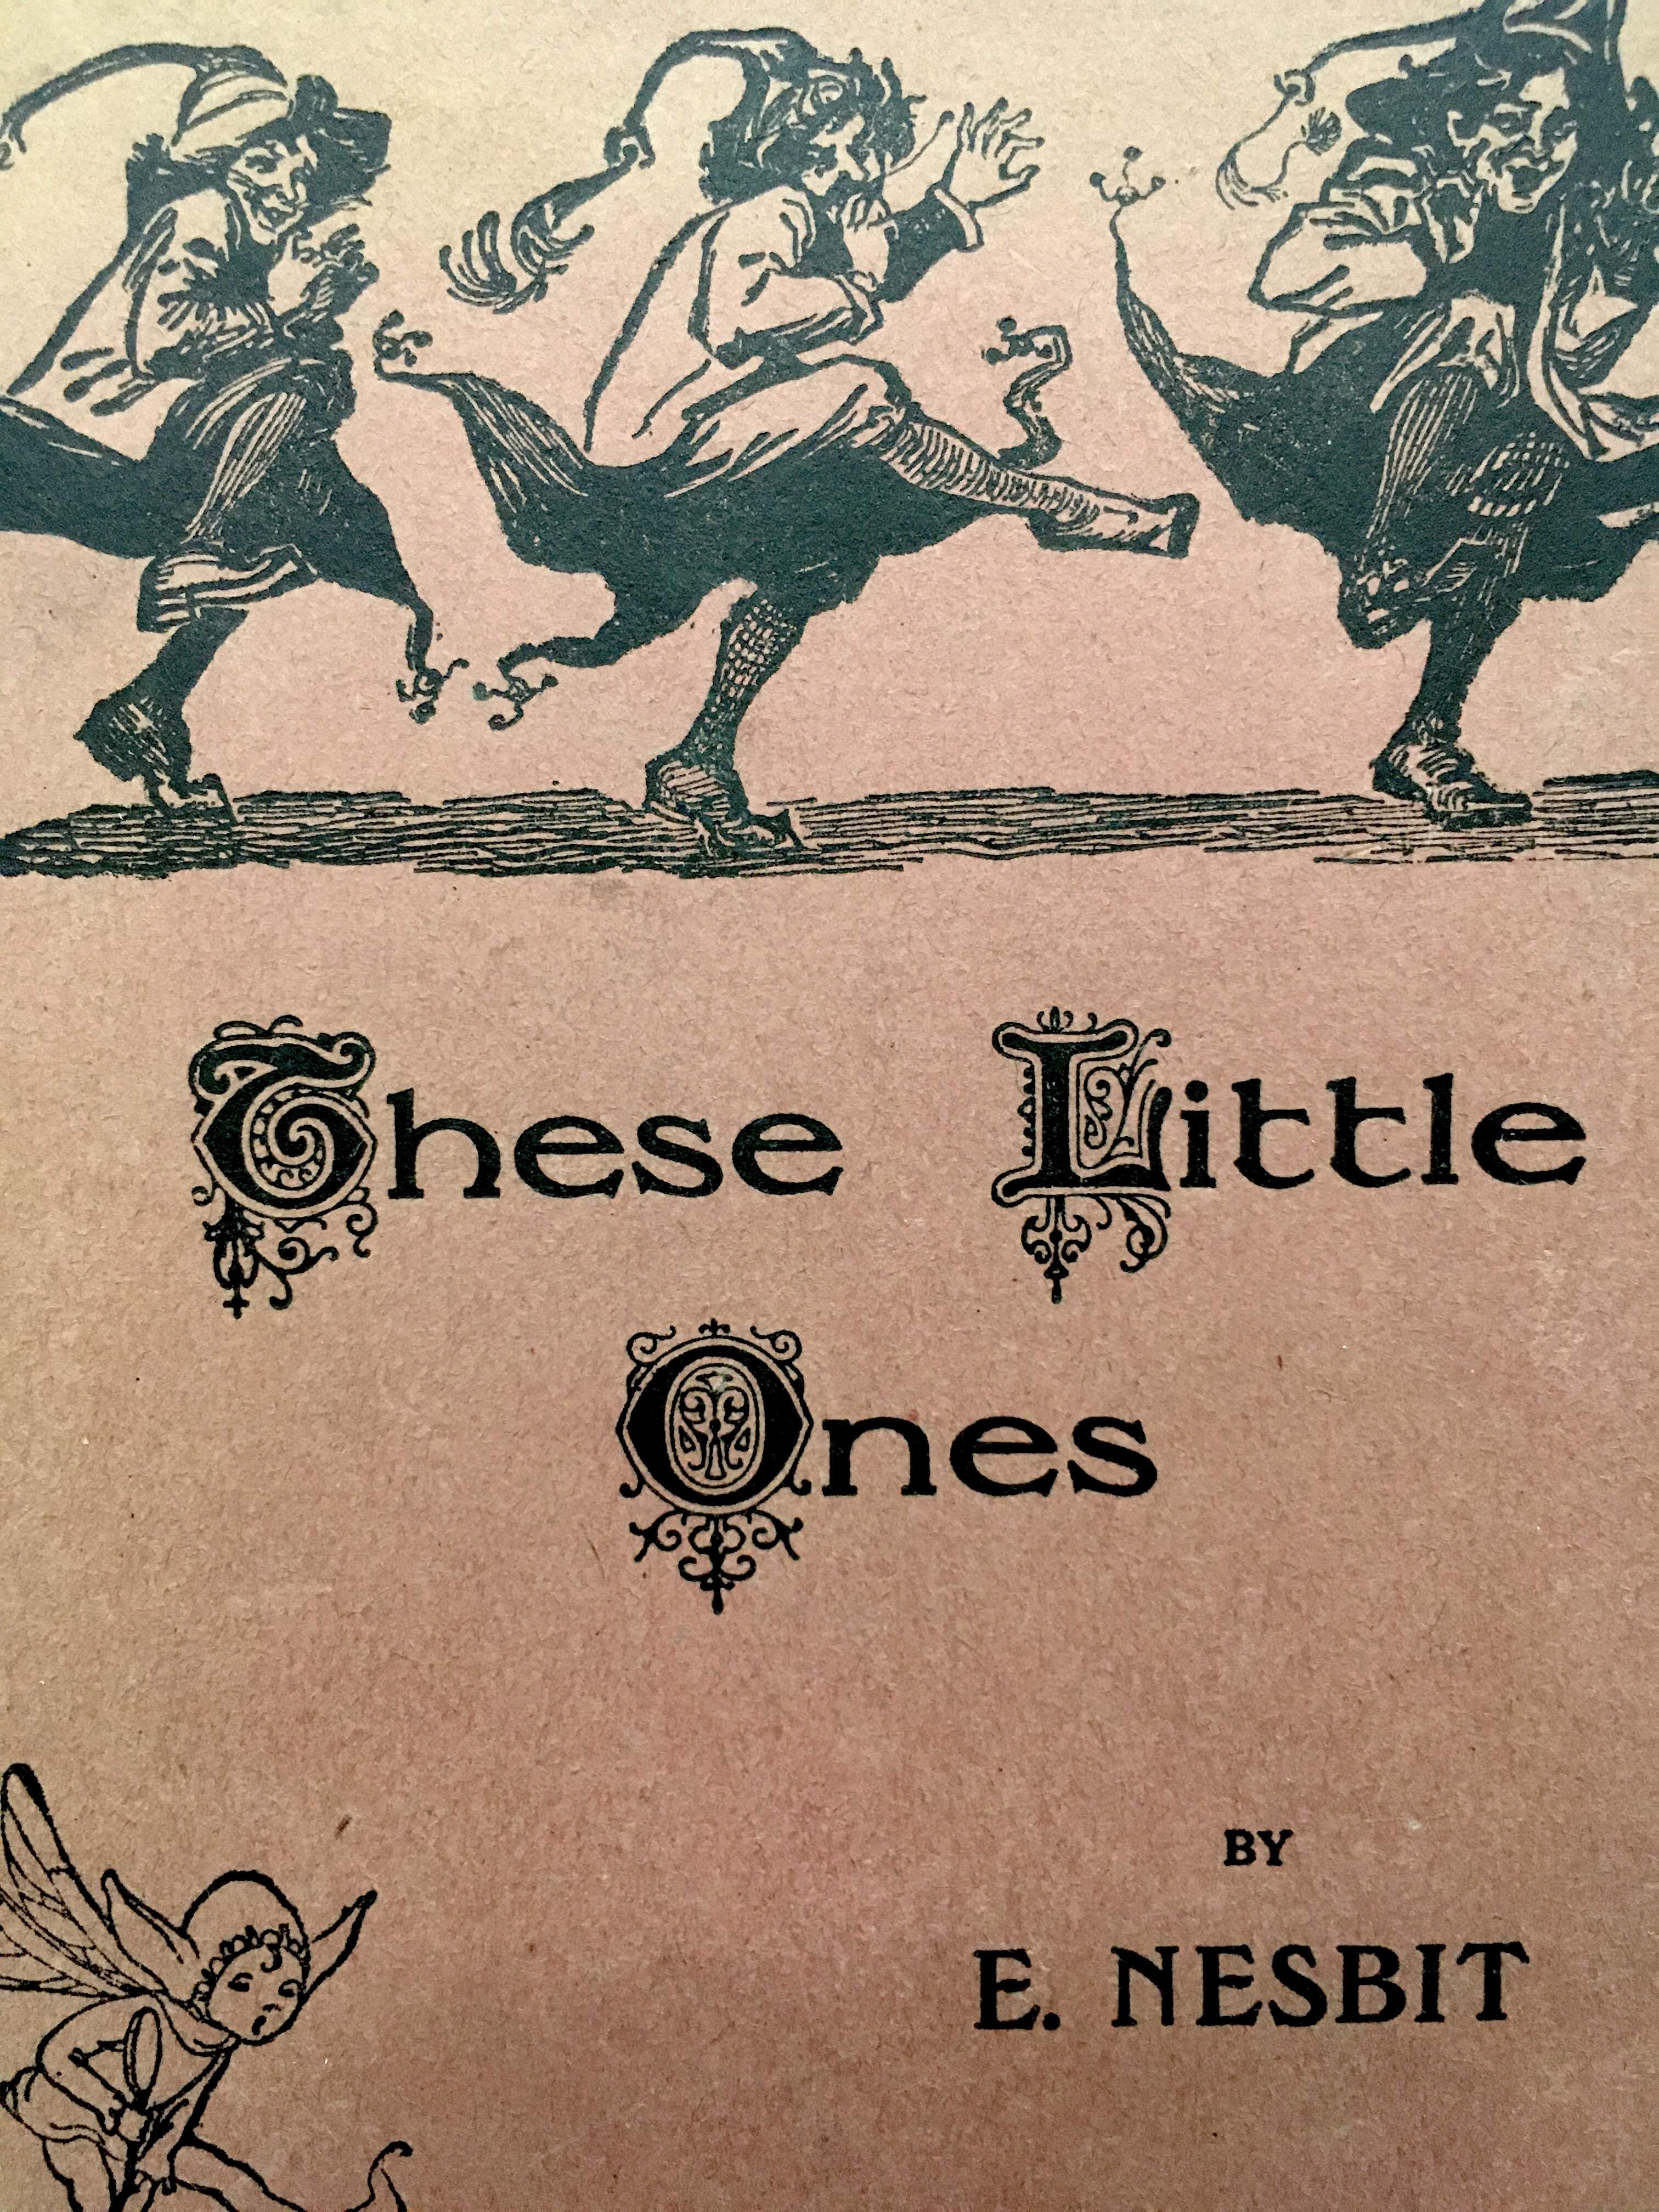 These Little Ones by E. Nesbit